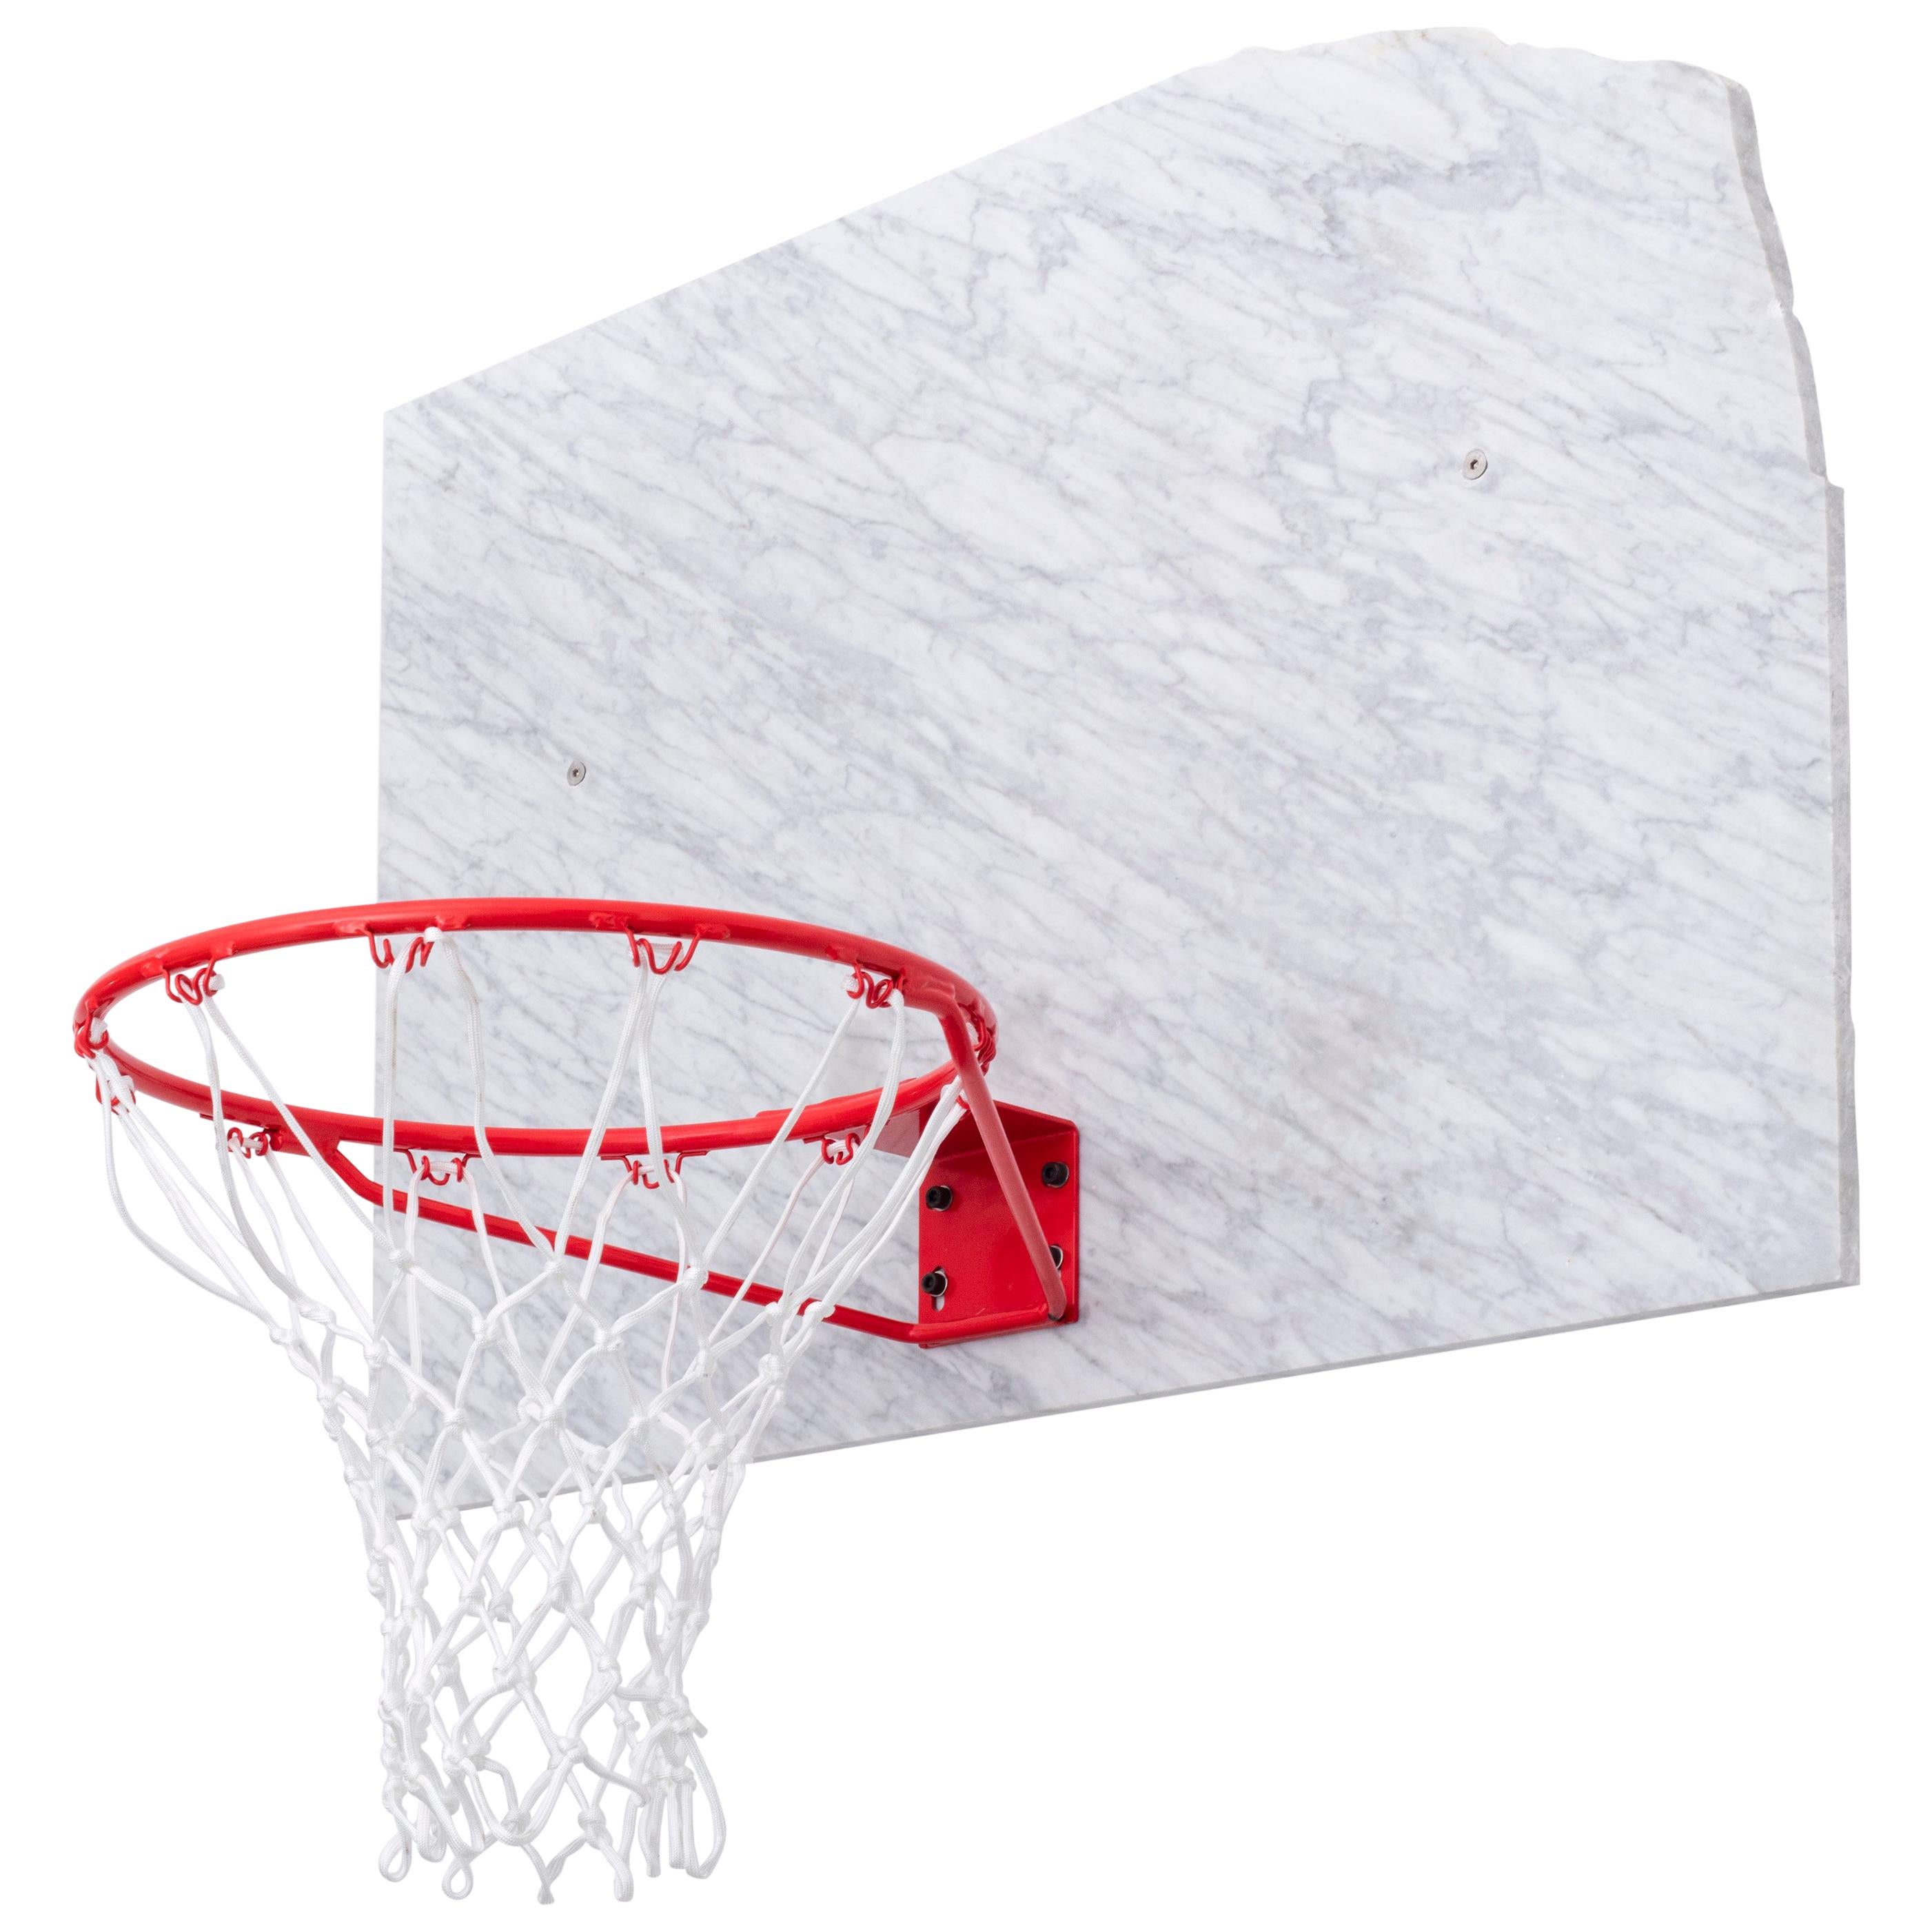 Basketball Pot and Backboard with Italian Marble, by Guillermo Santoma